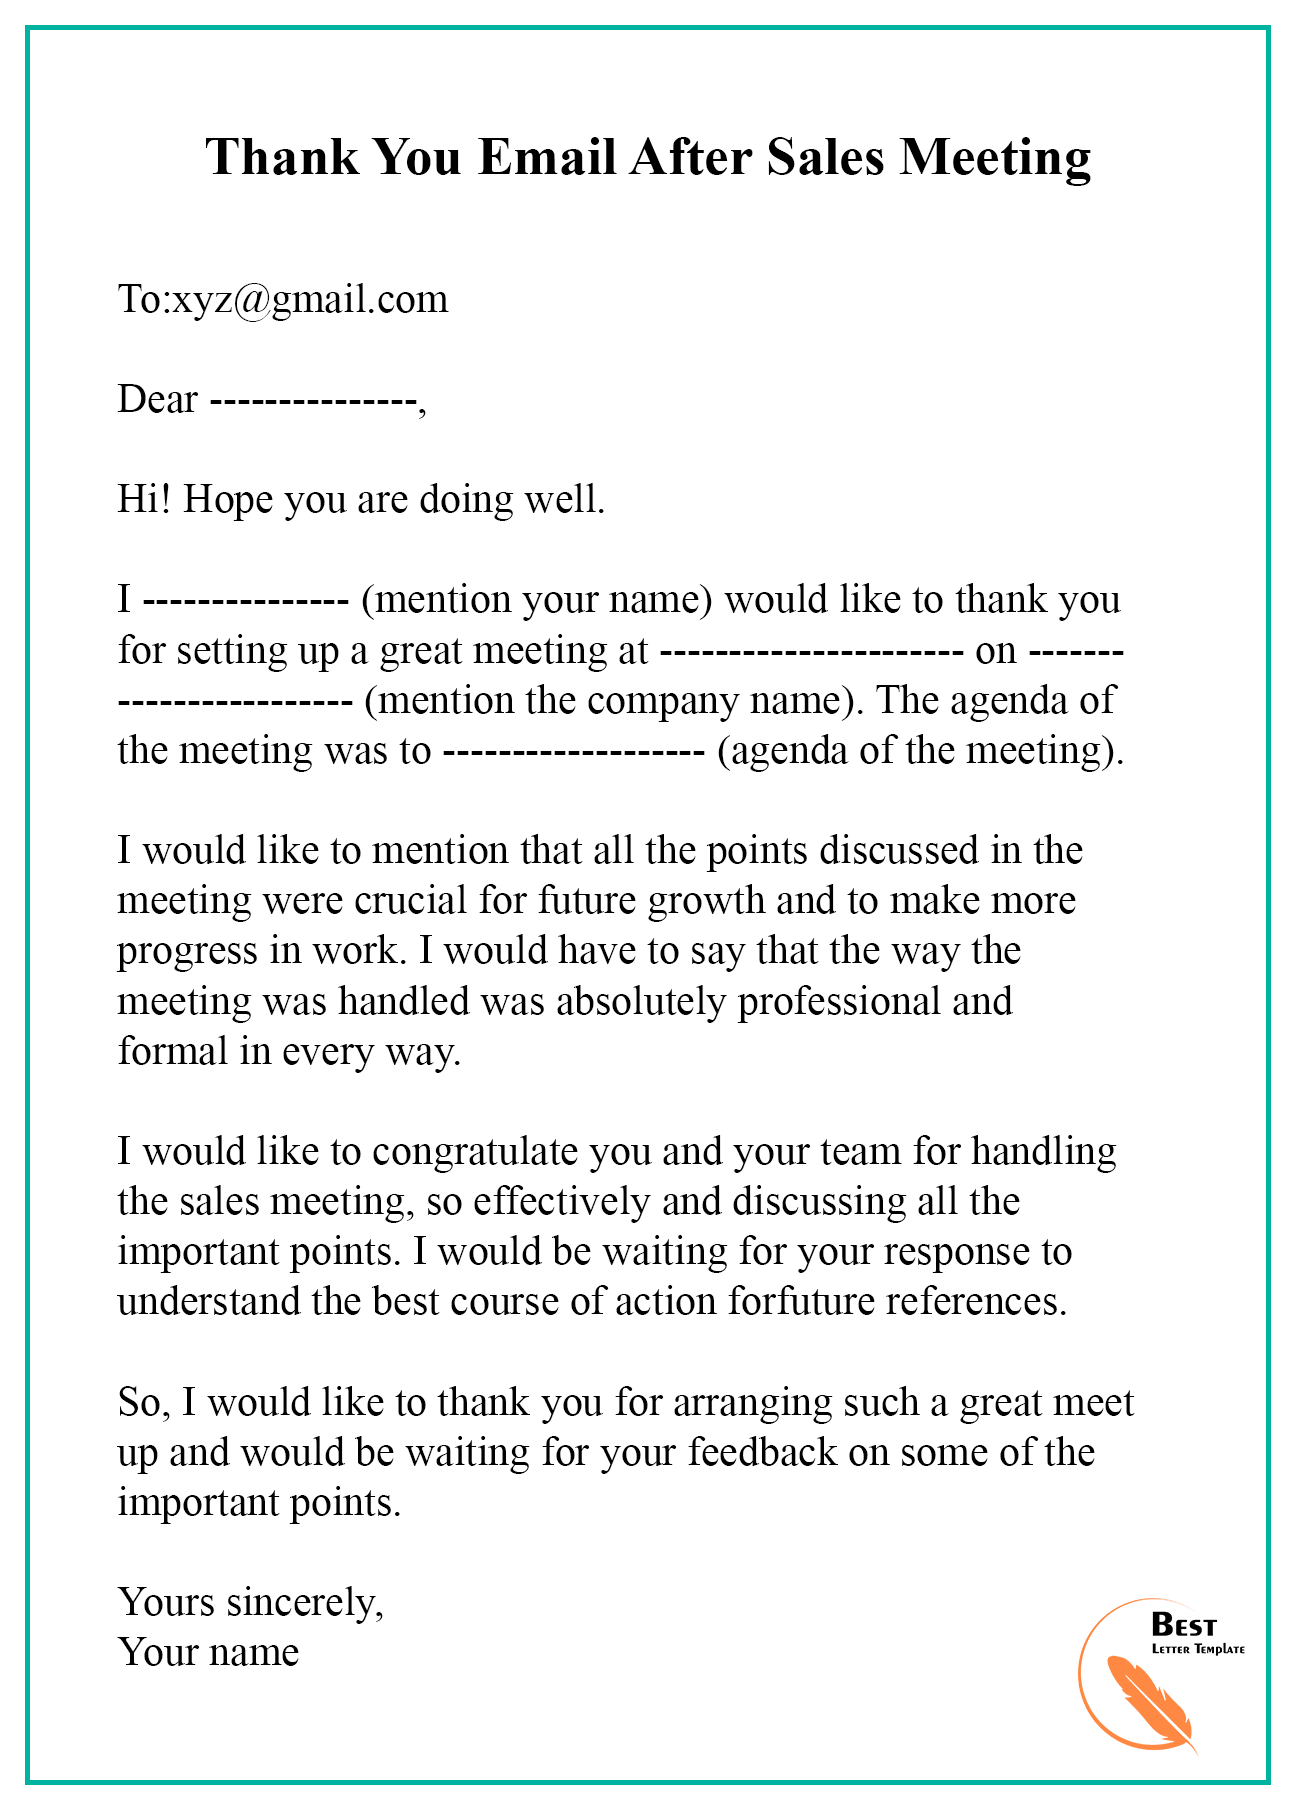 Thank You Email After Sales Meeting Best Letter Template with dimensions 1300 X 1806